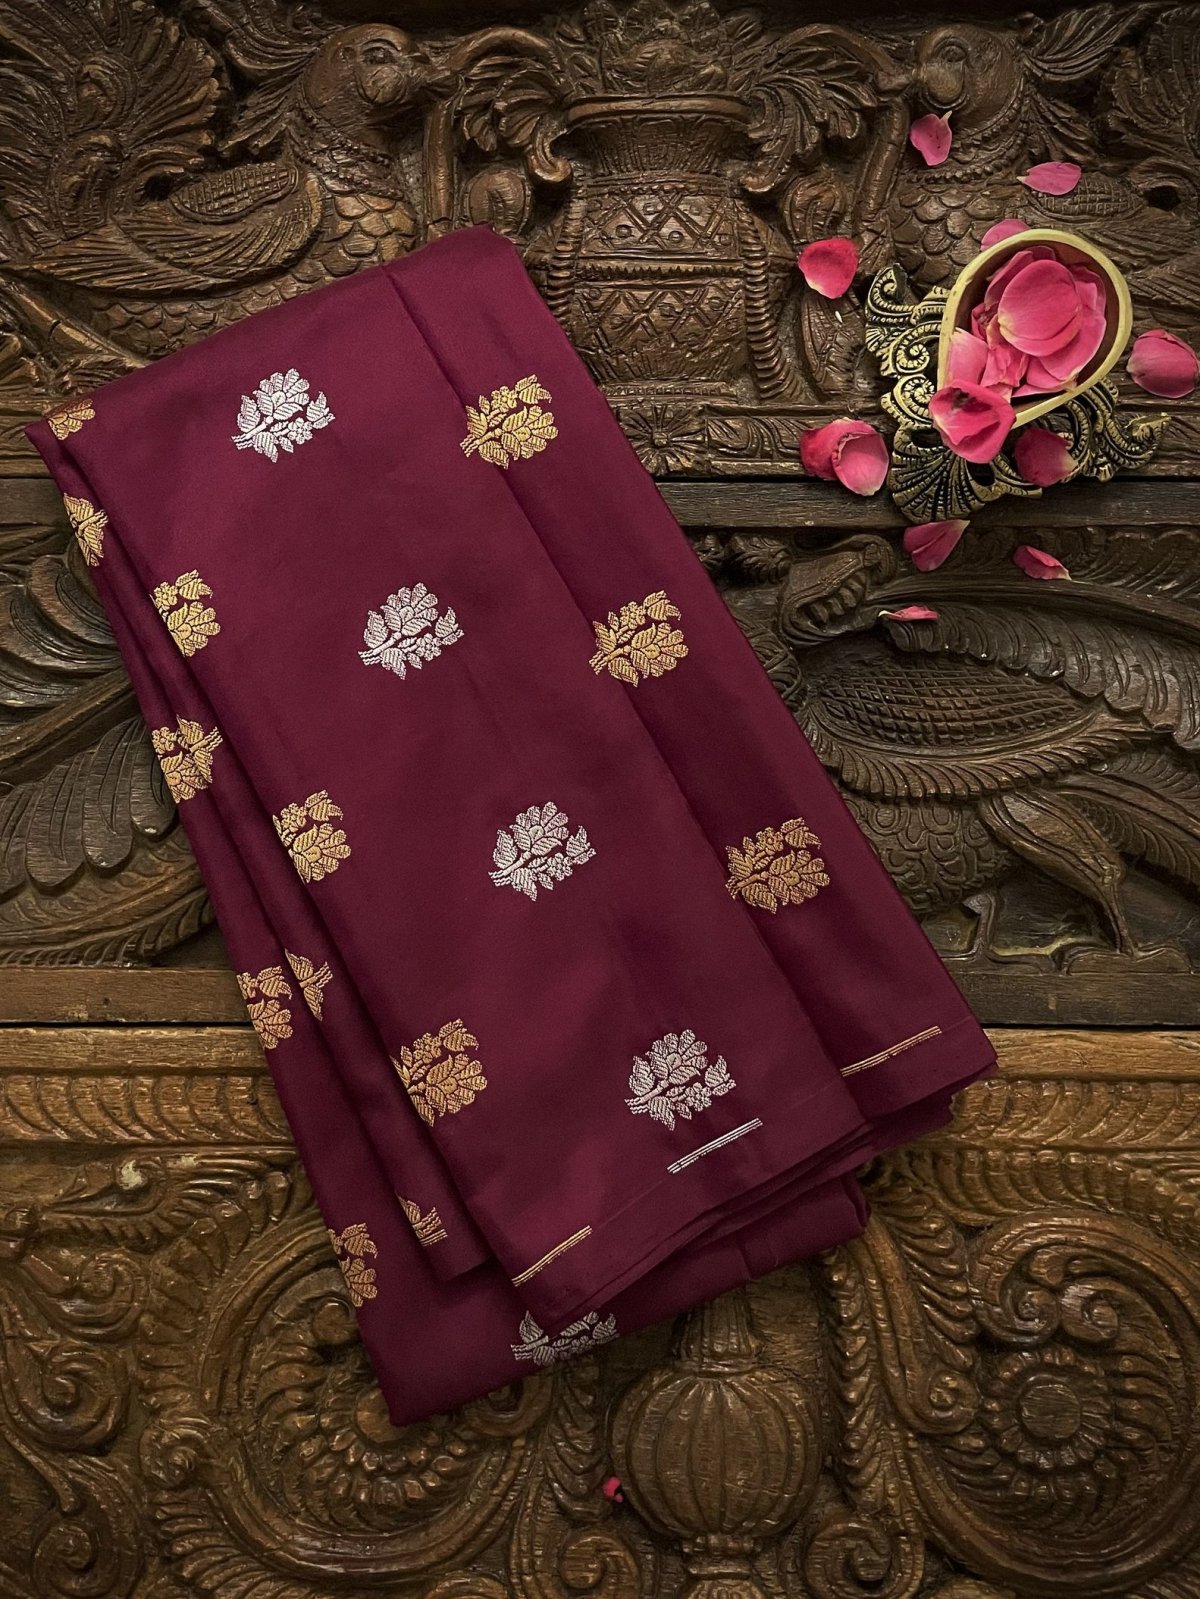 Maroon Banaras Silk Blouse With Gold and Silver Floral Buttis